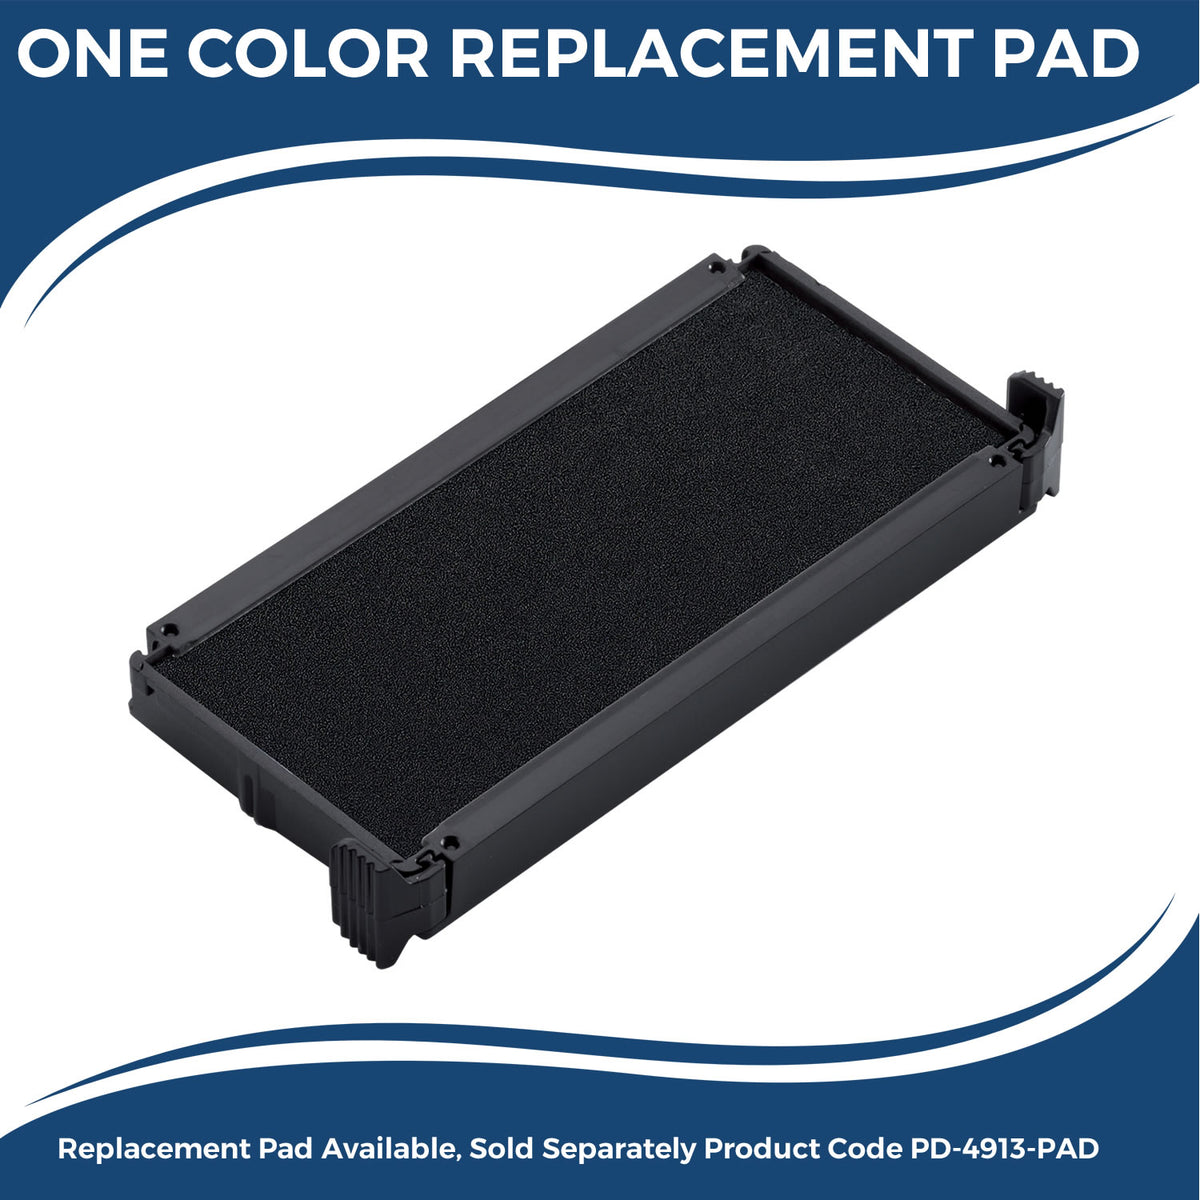 Large Self-Inking Contado Stamp 5525S Large Replacment Pad